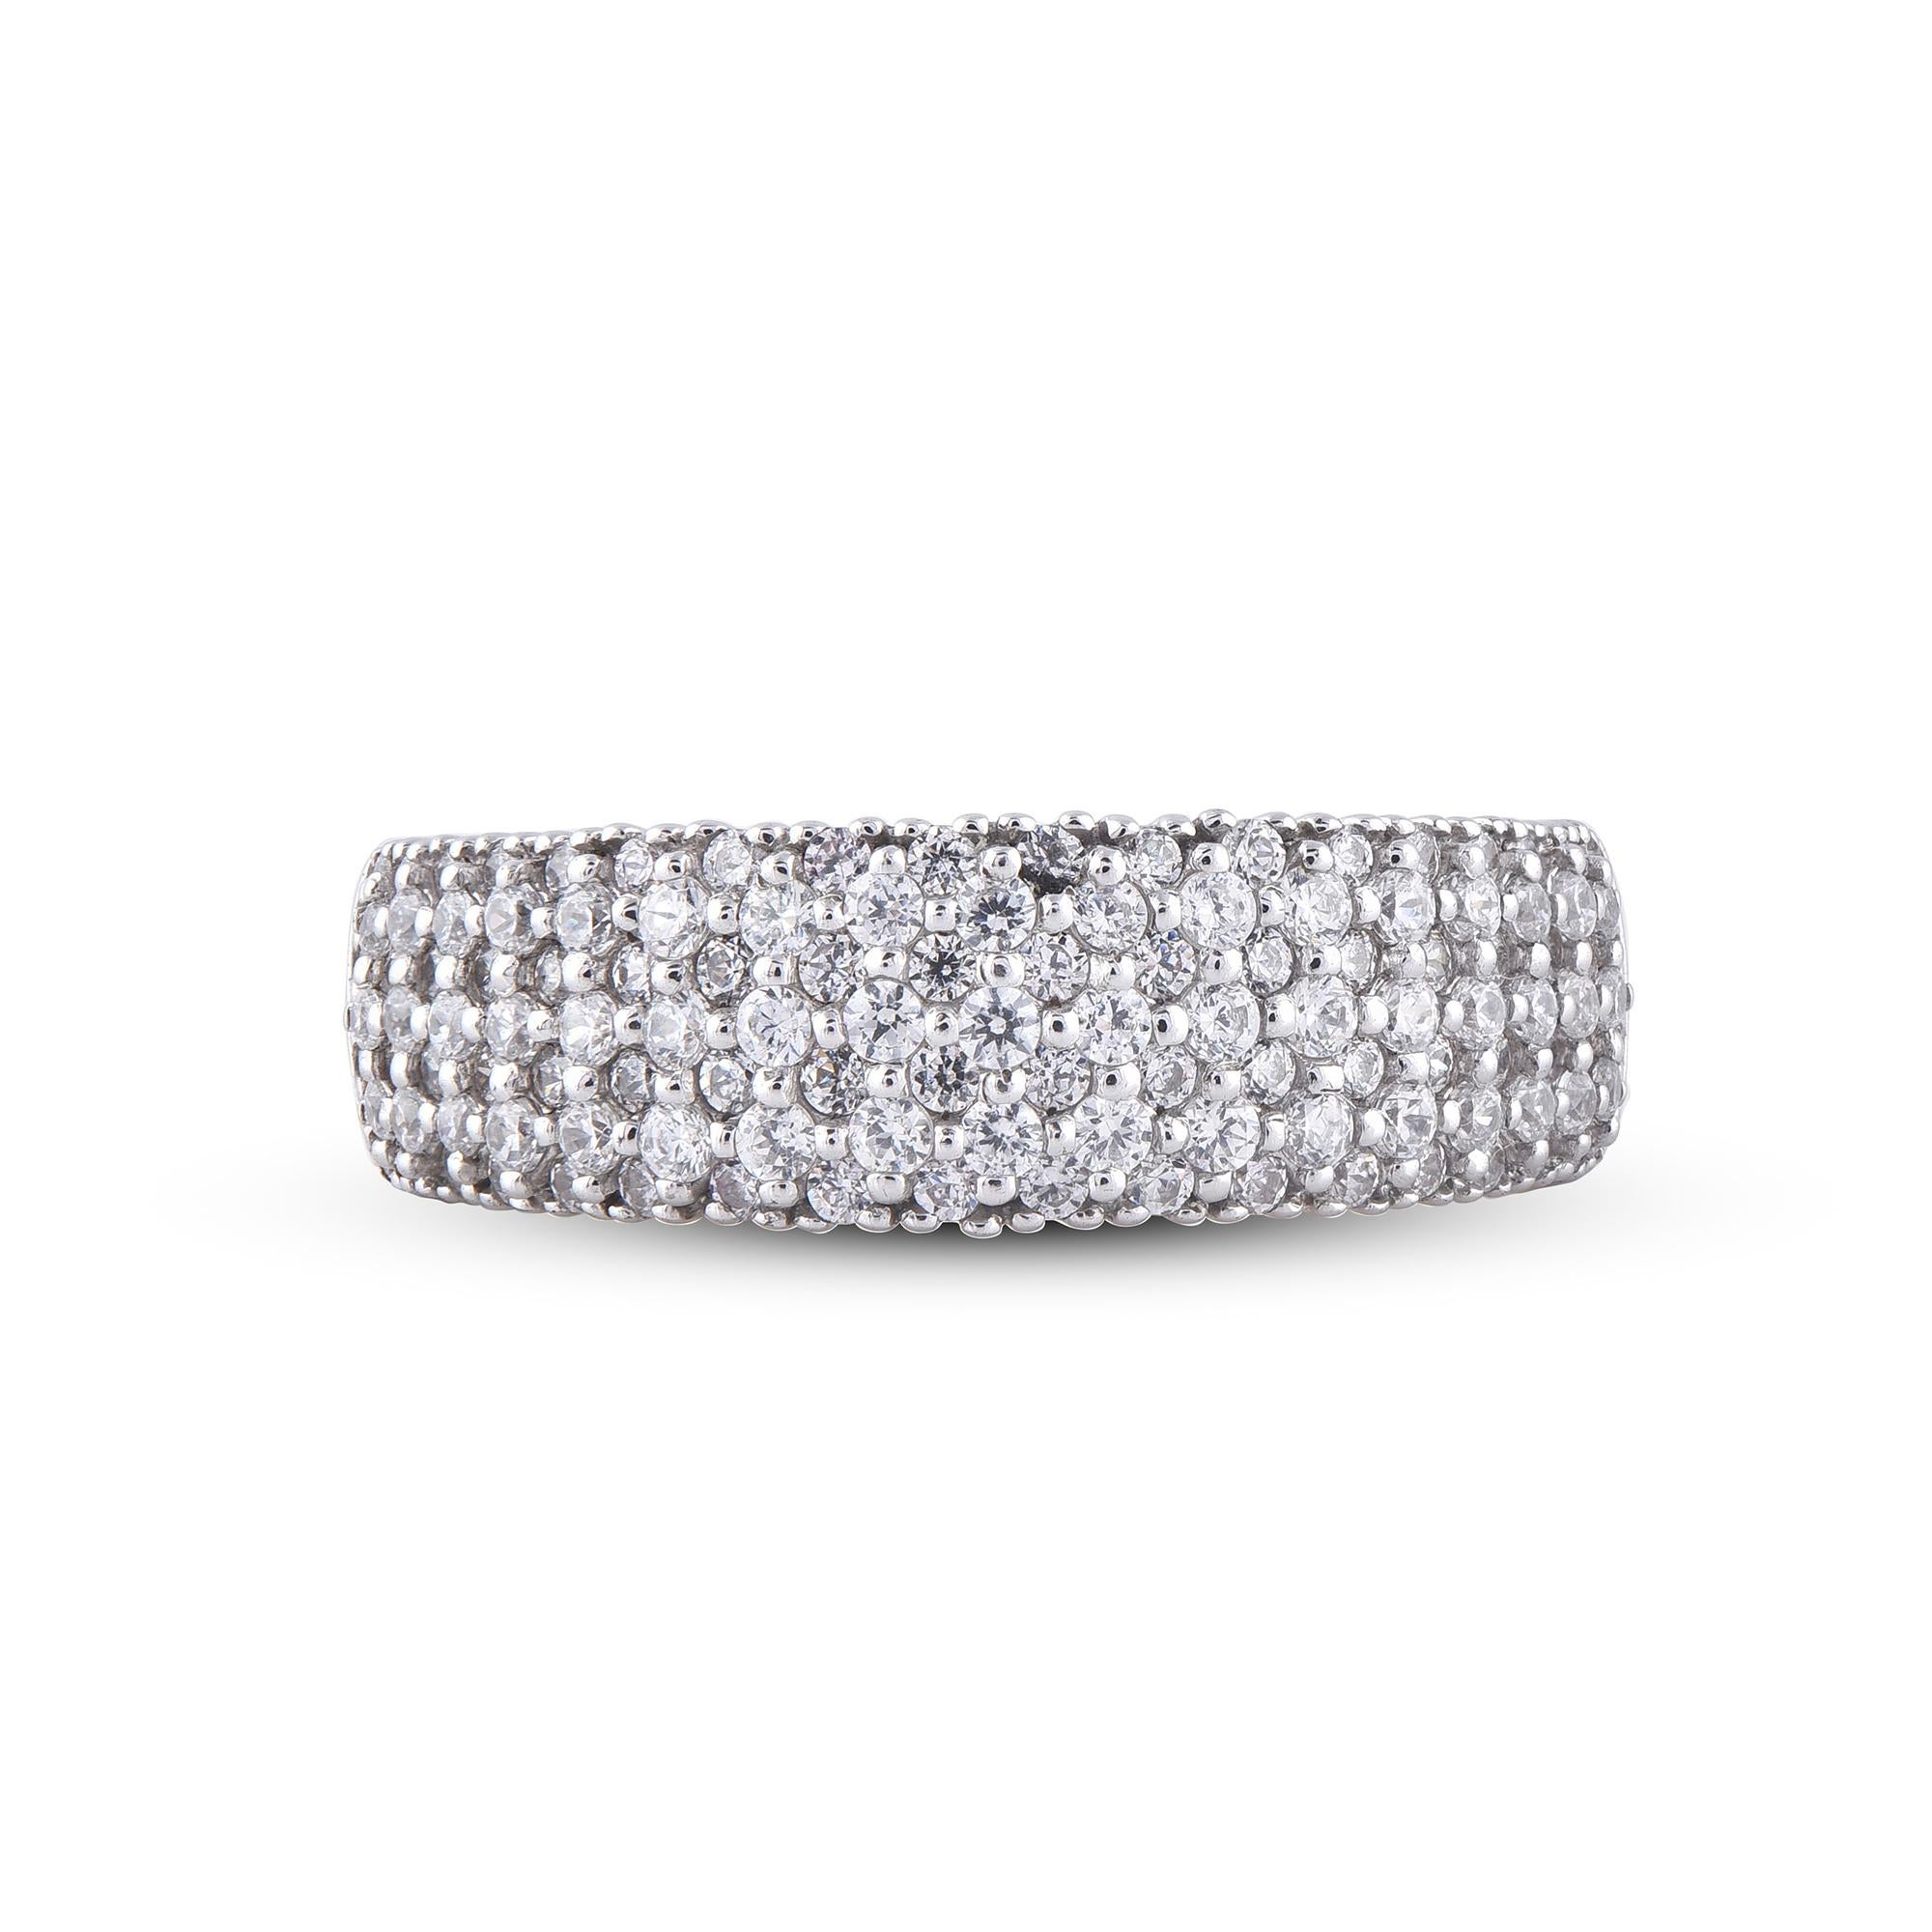 Stunning and classic, this diamond ring is beautifully crafted in 14K Solid White gold. The wide band is lined with rows of sparkling 123 round-cut diamonds in secured prong settings. the diamonds are natural, not-treated and conflict-free with H-I